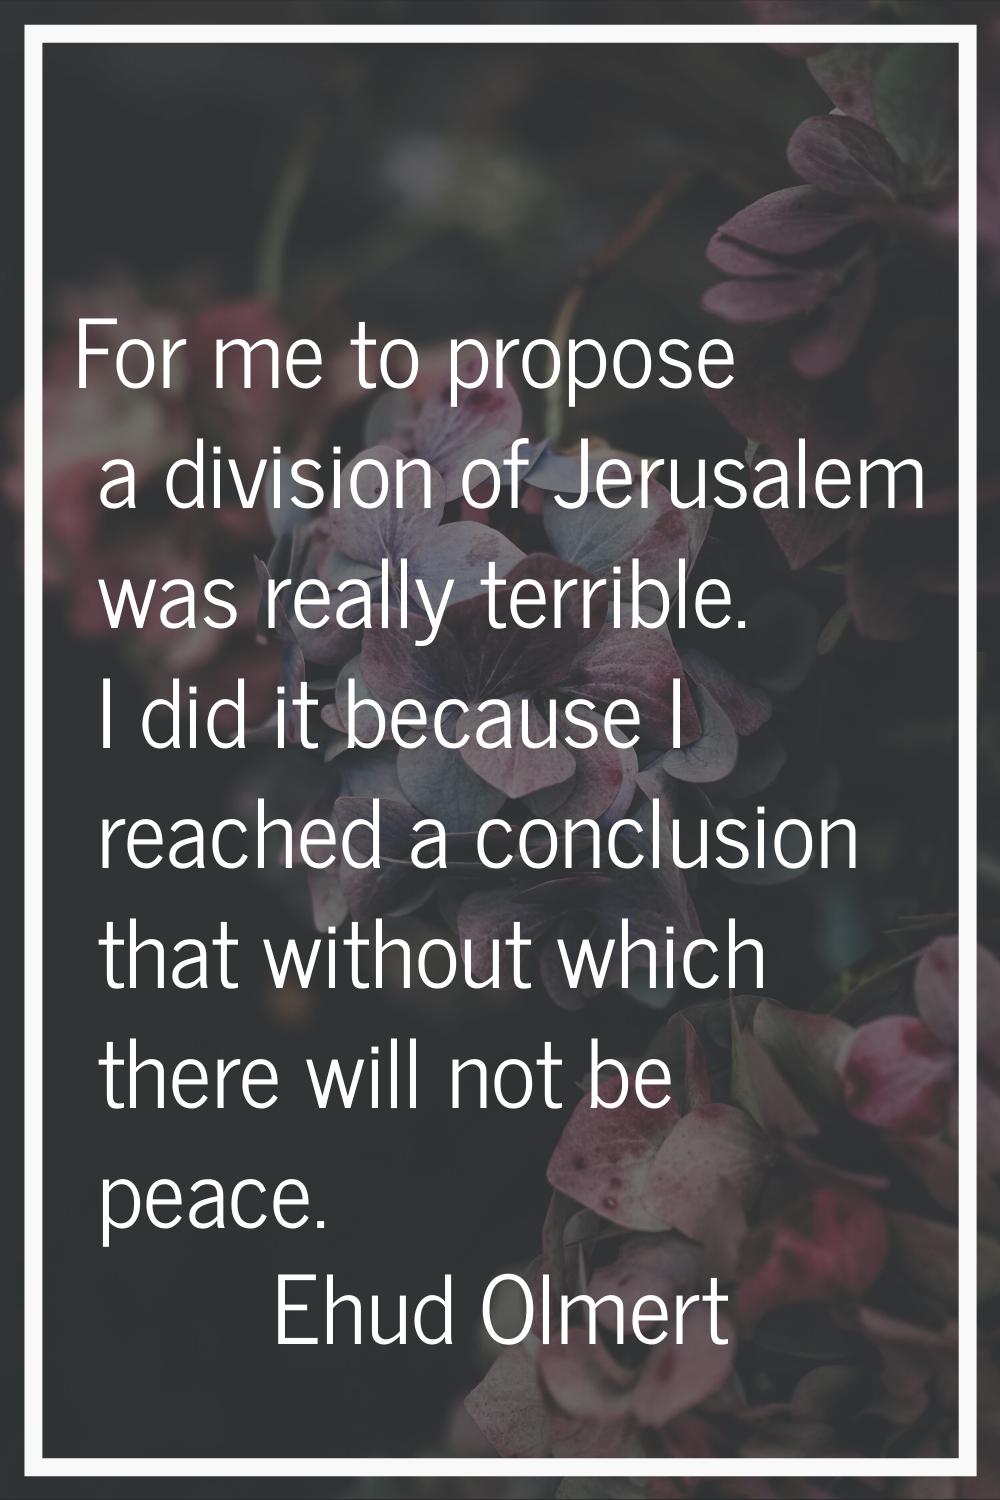 For me to propose a division of Jerusalem was really terrible. I did it because I reached a conclus